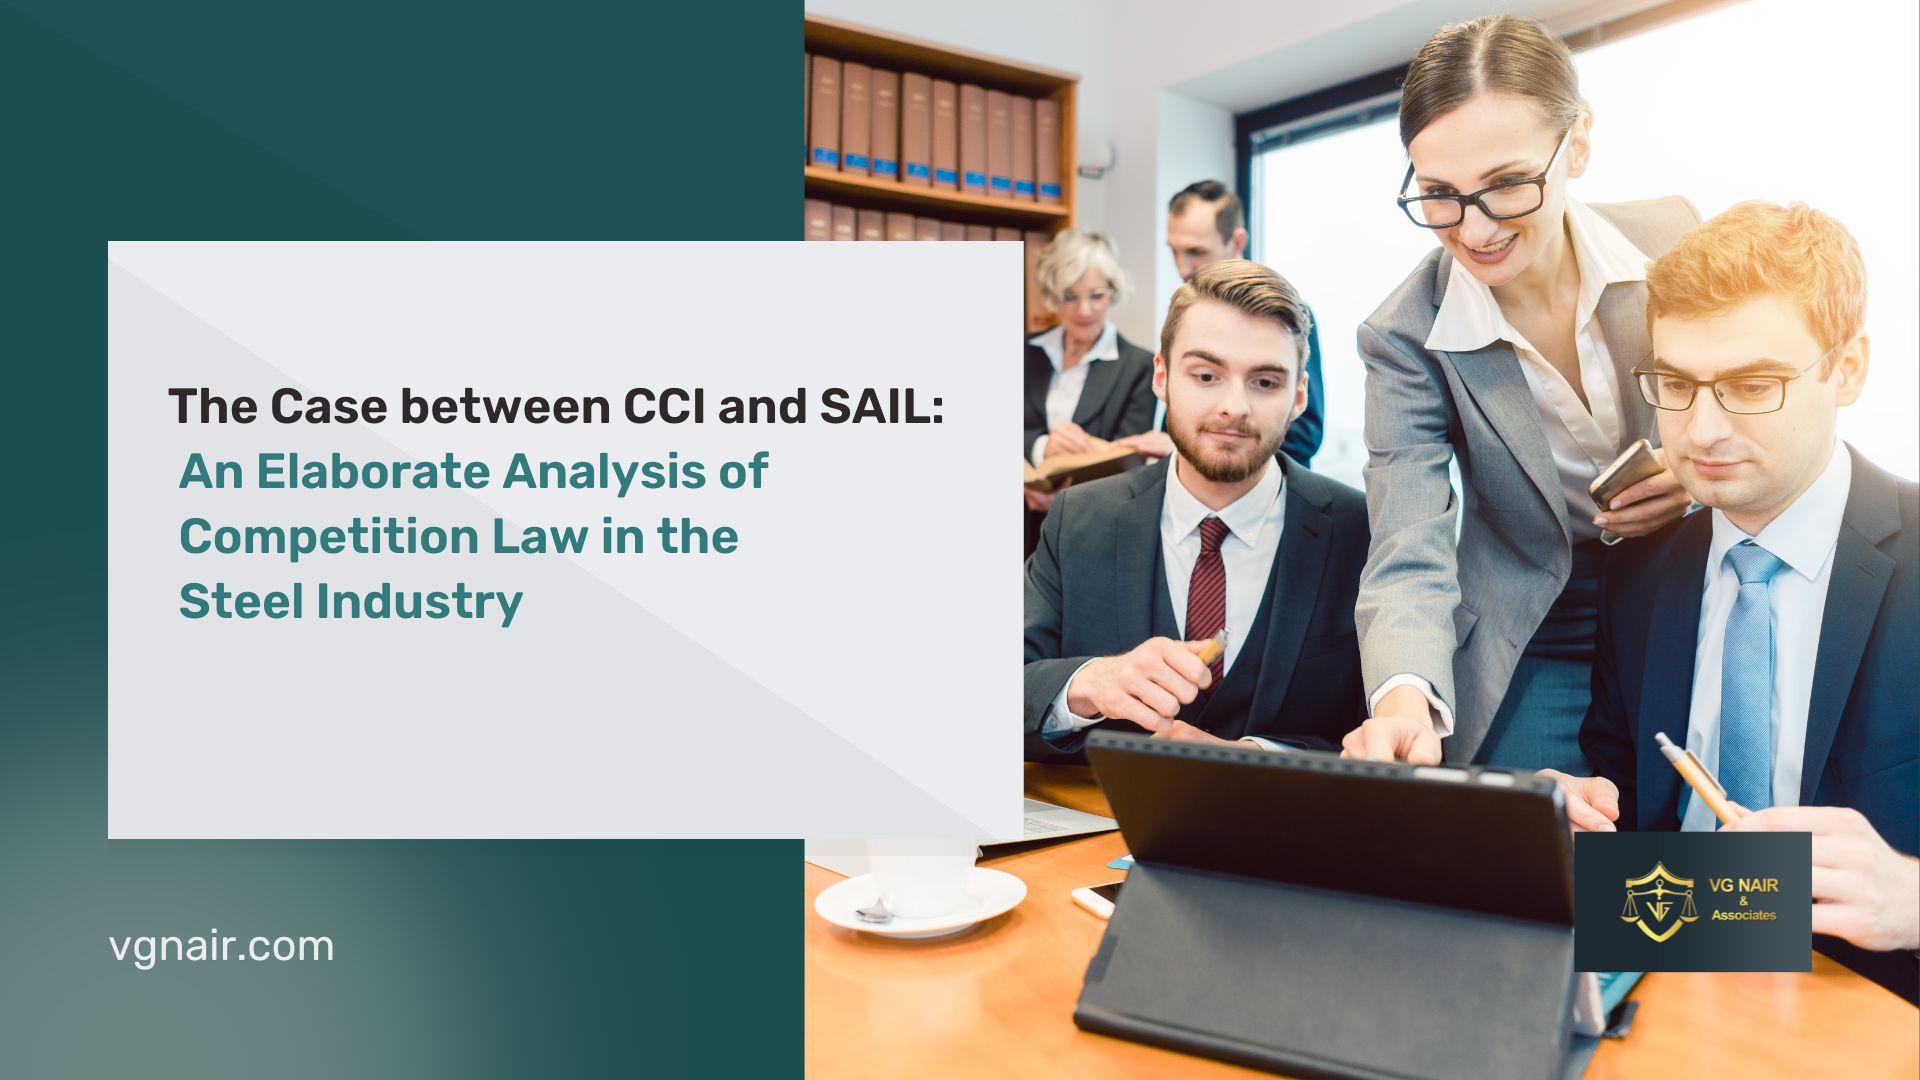 The Case between CCI and SAIL: An Elaborate Analysis of Competition Law in the Steel Industry